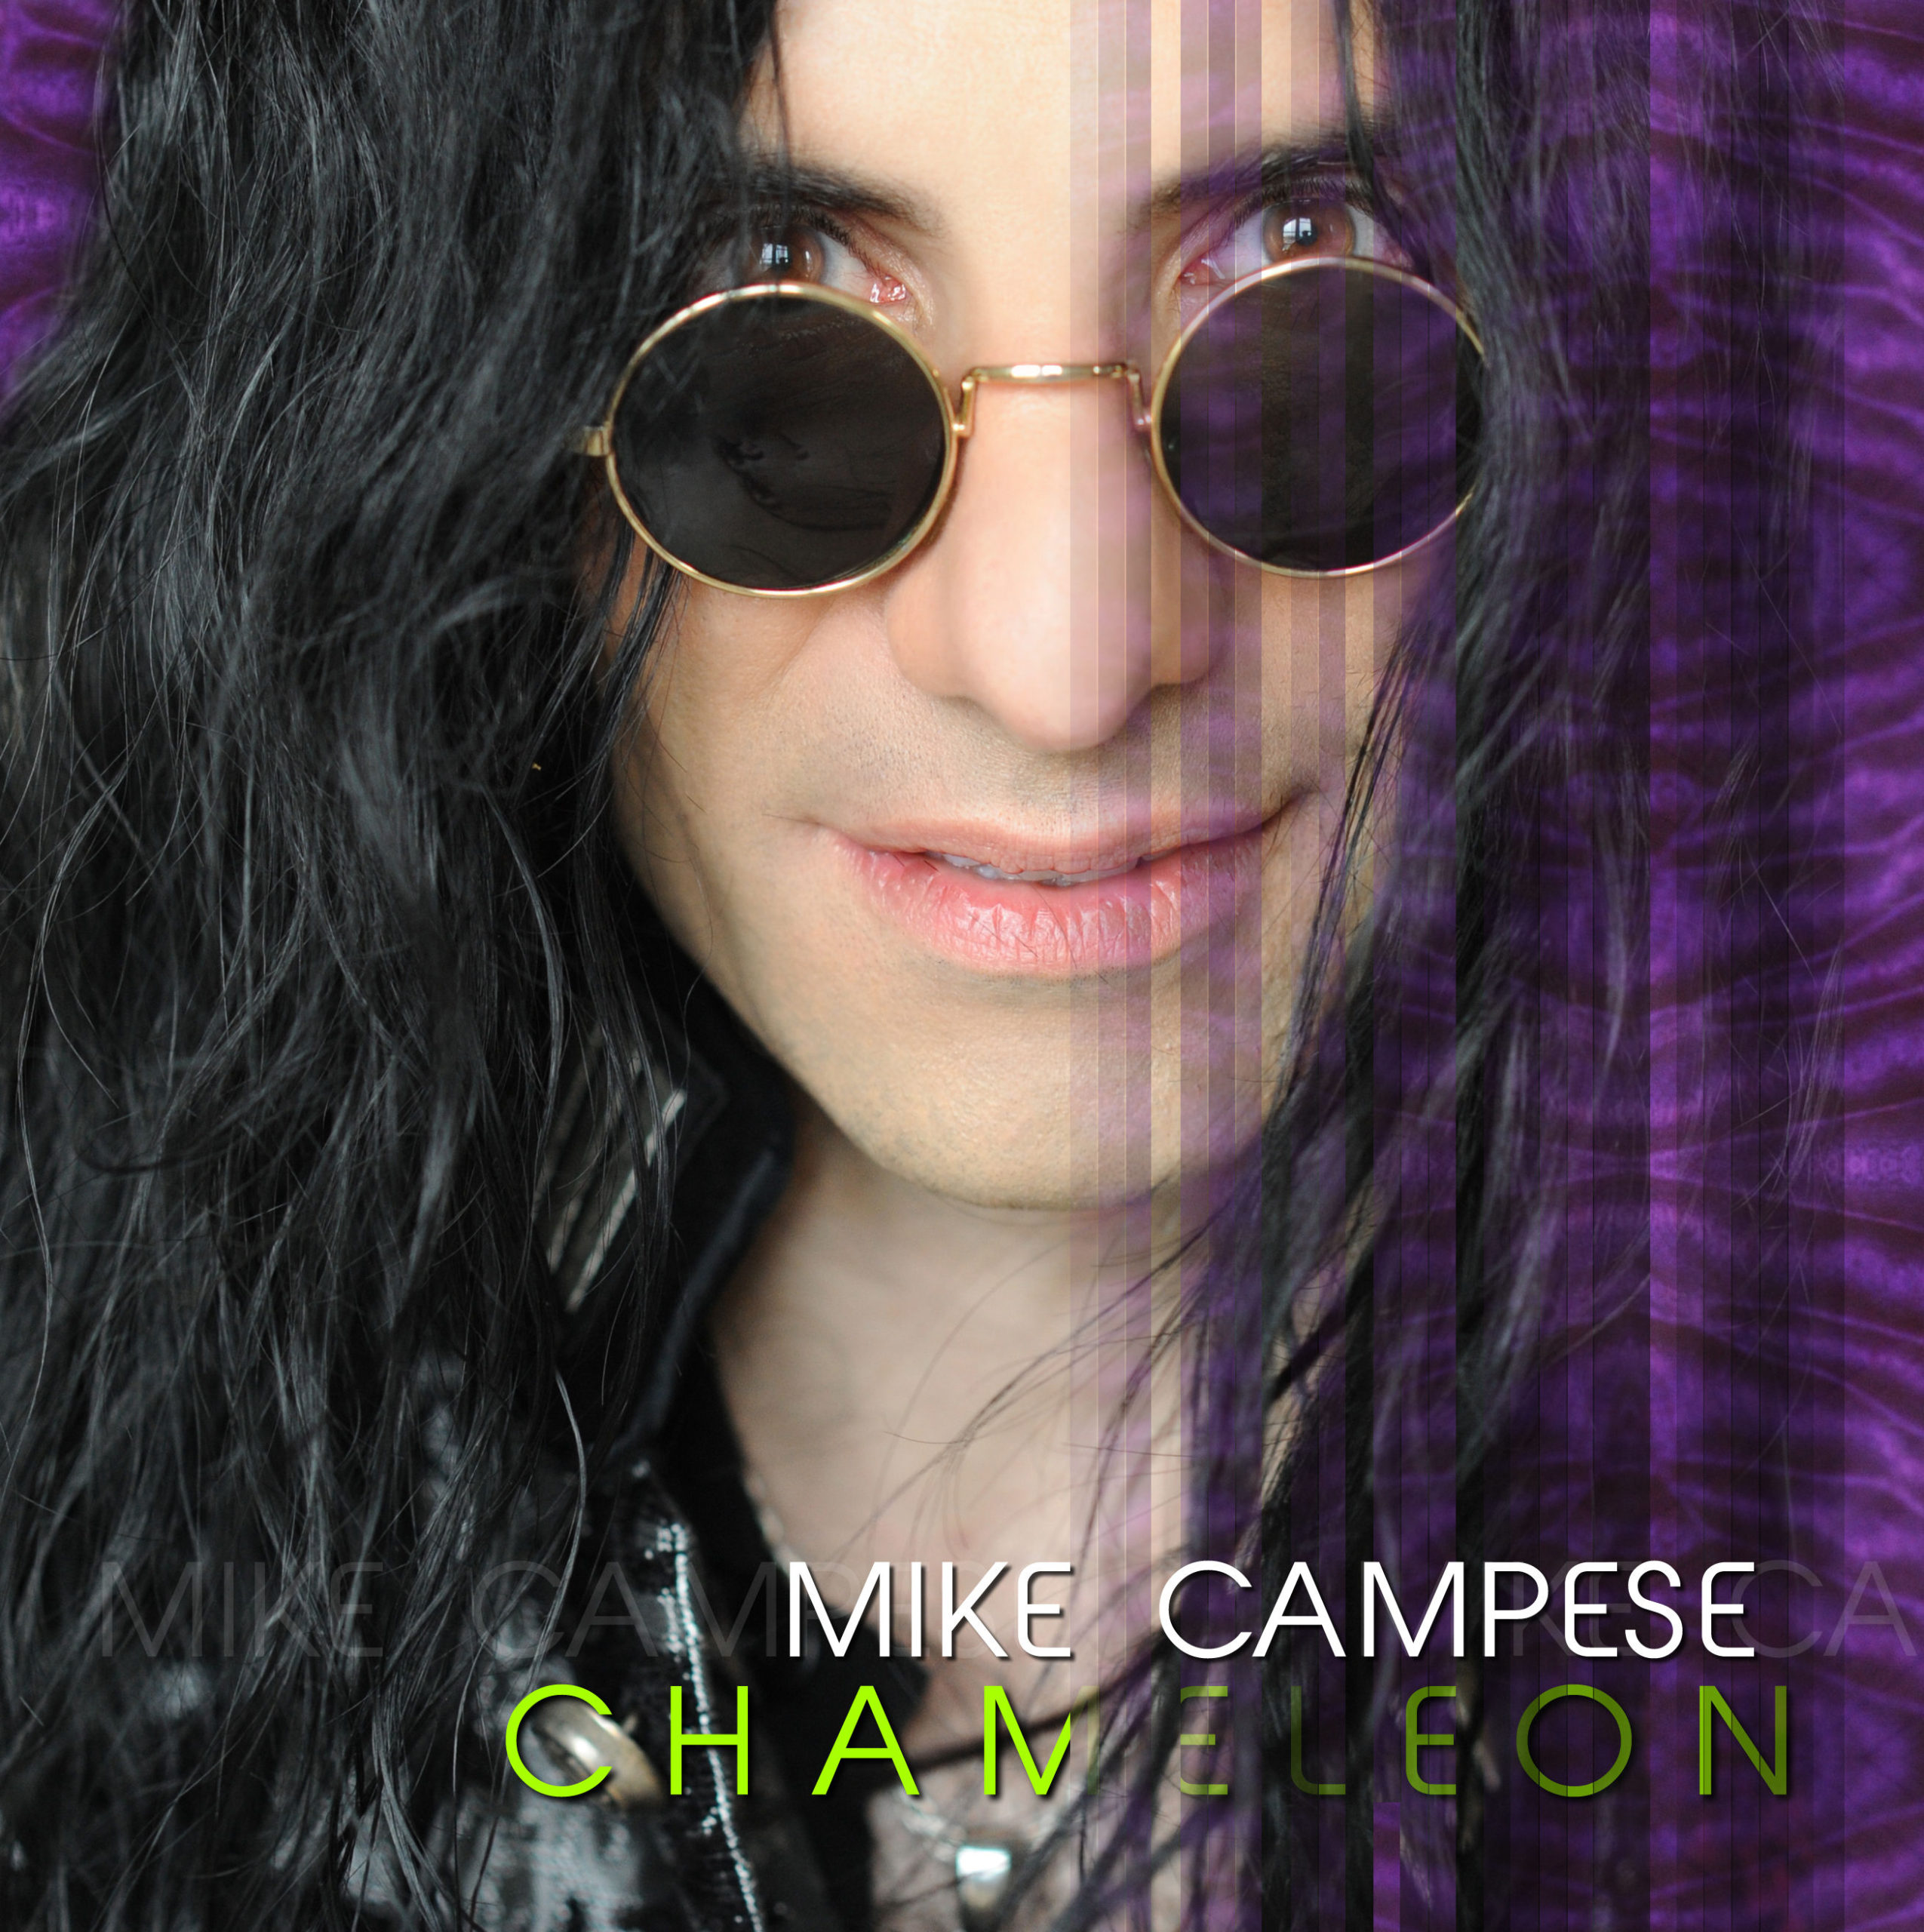 Mike Campese "Chameleon" Album Cover.